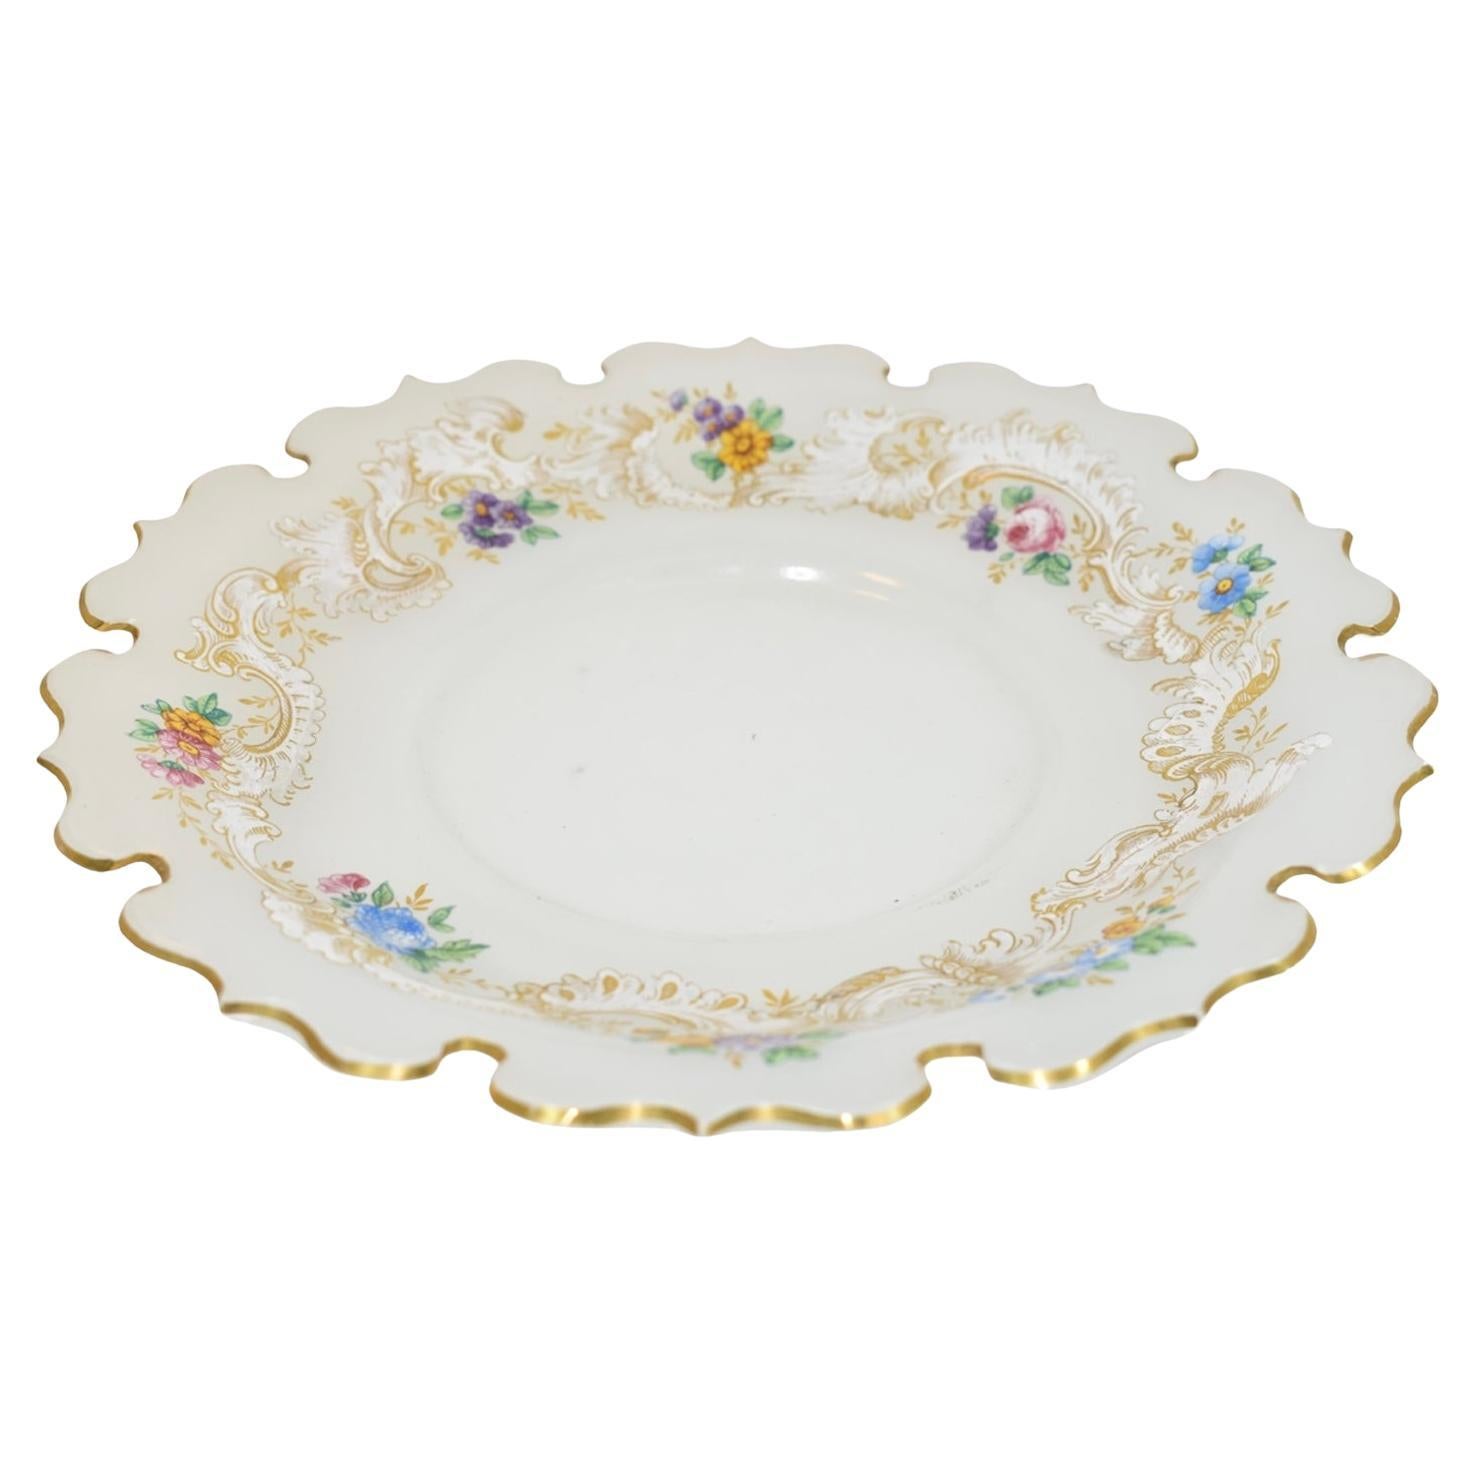 Antique Opaline Enameled Glass Tazza Bowl and Plate, 19th Century For Sale 3